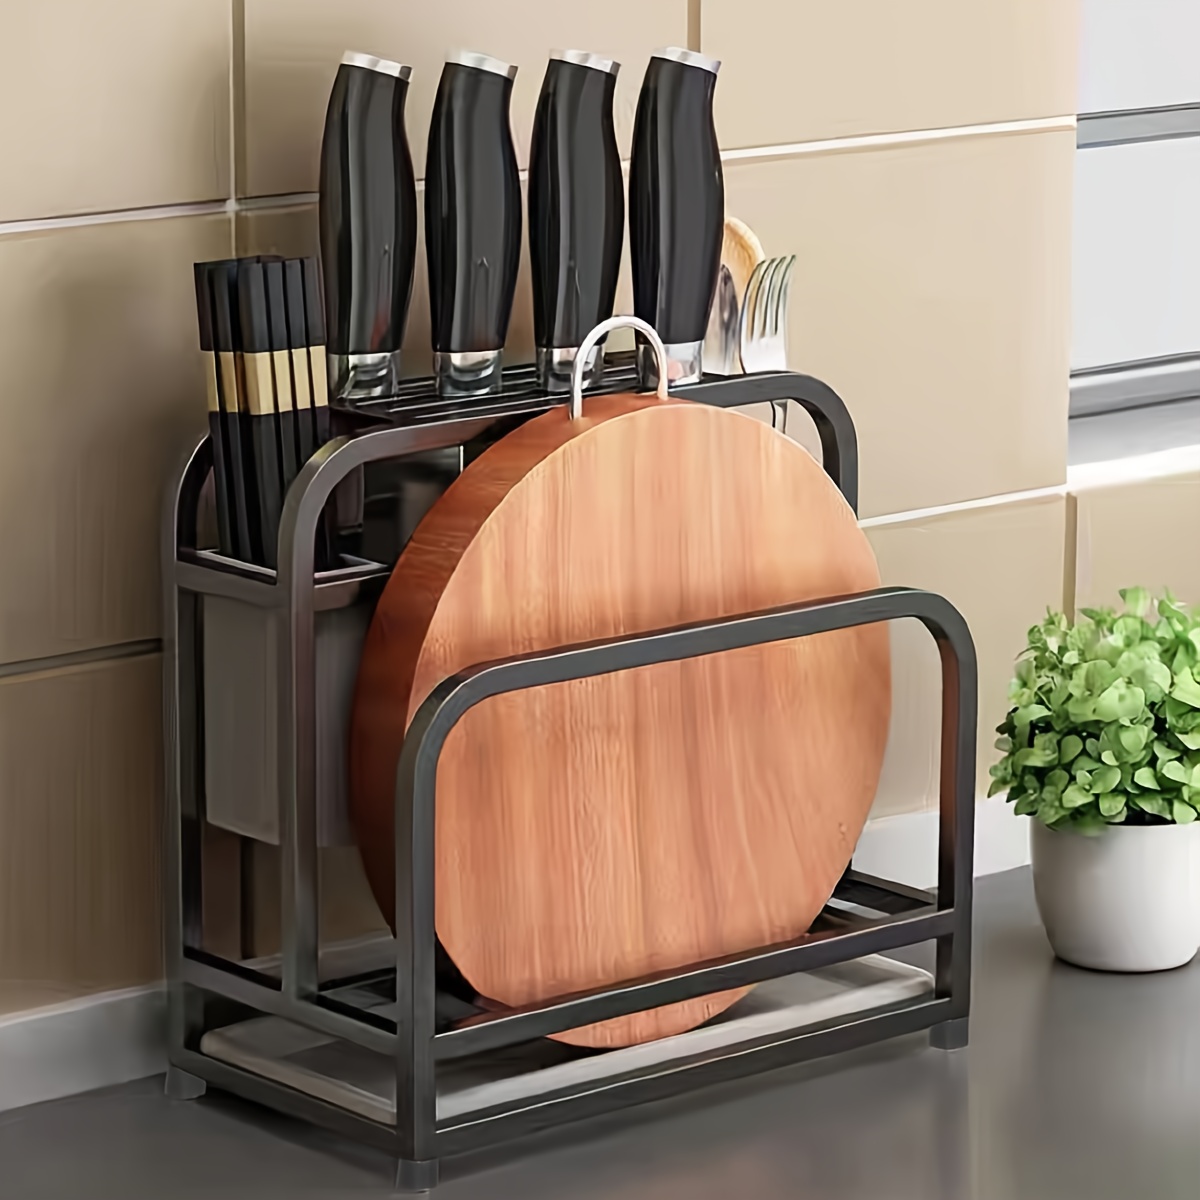 Bunpeony Stainless Steel Standing Dish Rack with Cutting Board Holder, Utensil Holder, Knife Holder, and Cup Holder